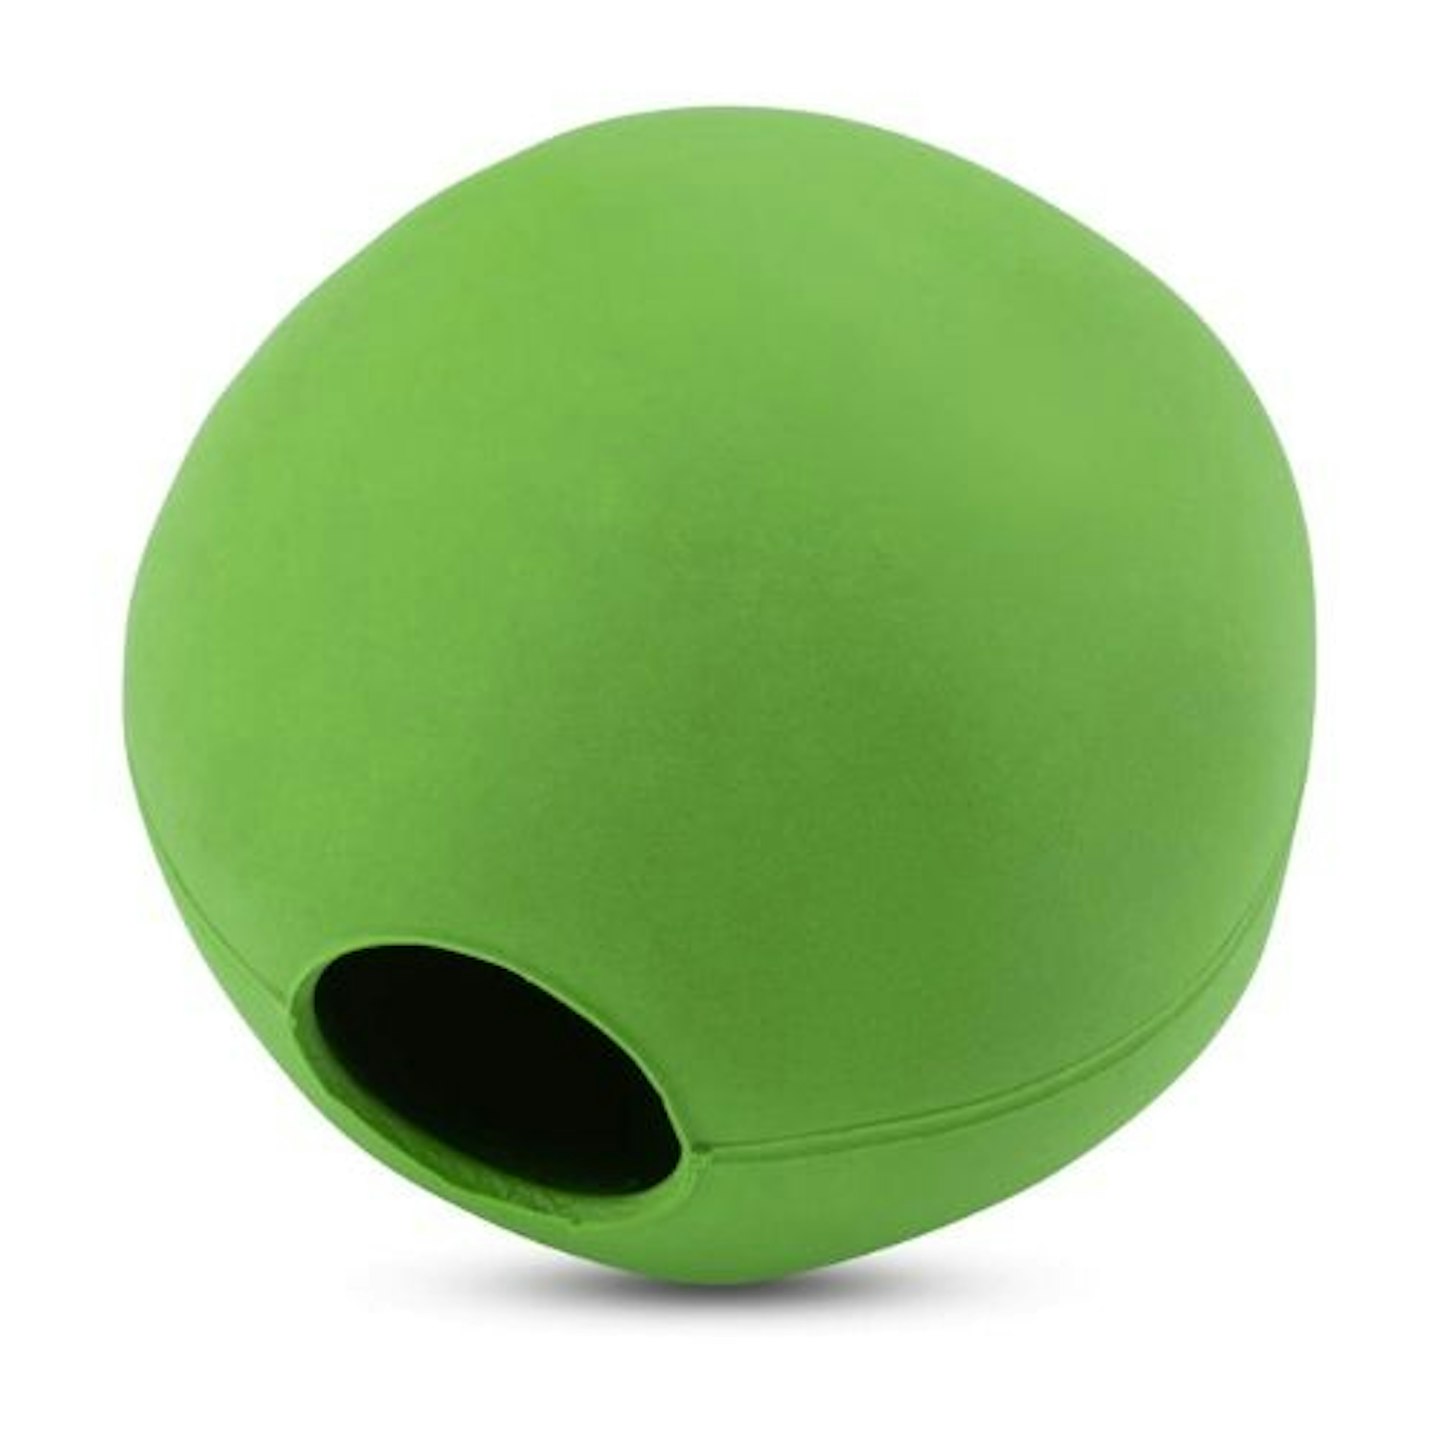 Beco Dog Ball - Eco Friendly Natural Rubber Hollow Chew Toy for Dogs - Extra Strong - Small - Green